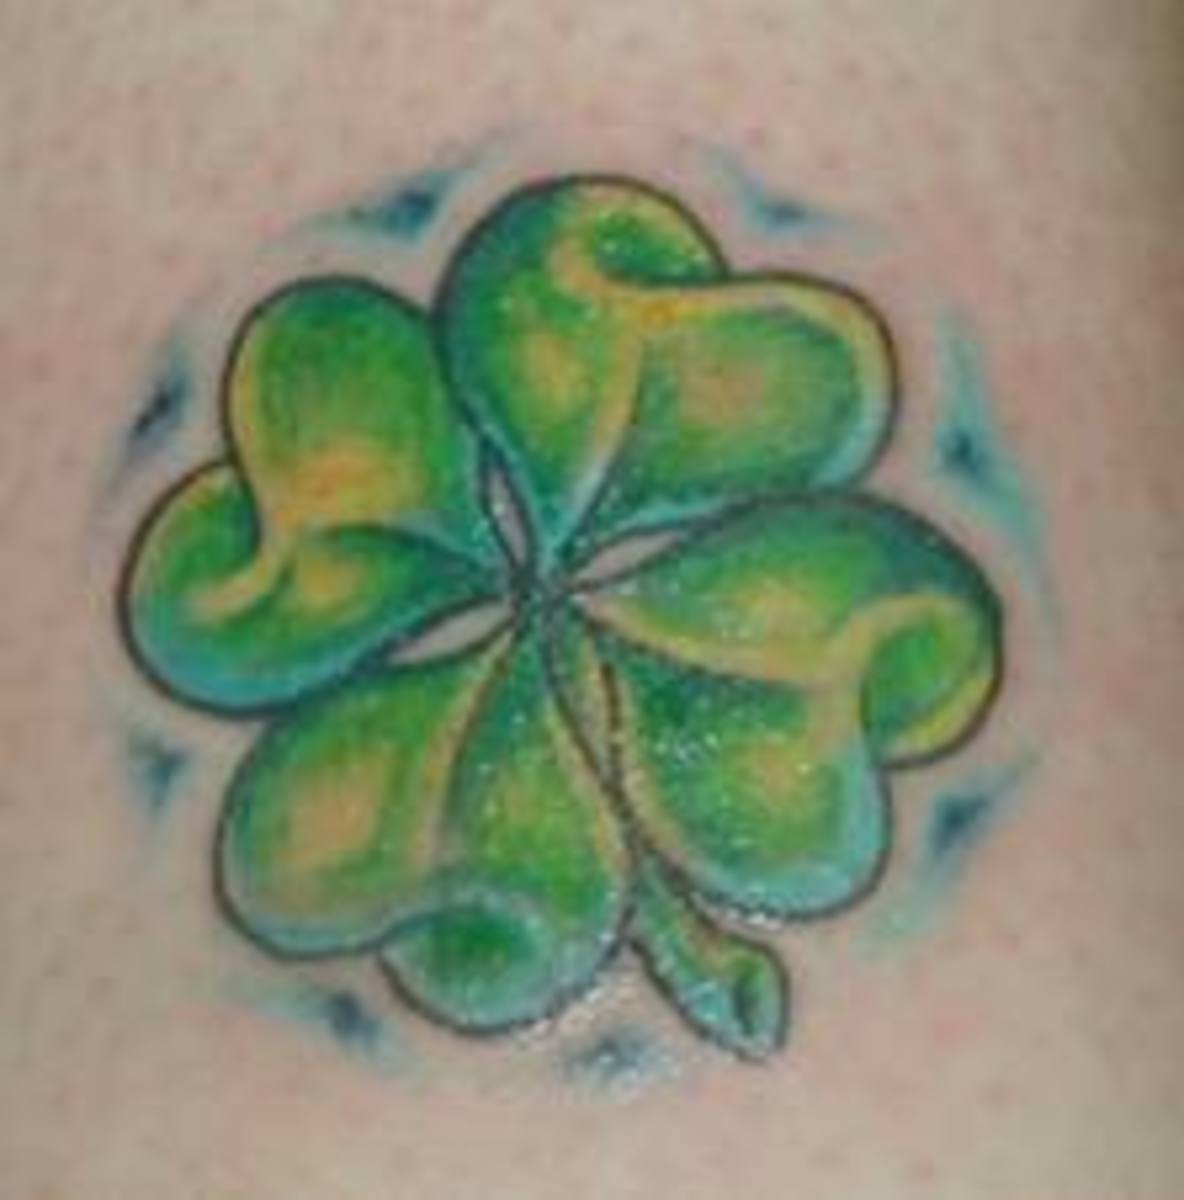 Four Leaf Clover Tattoo Designs And Meanings; Four Leaf Clover Tattoo Ideas